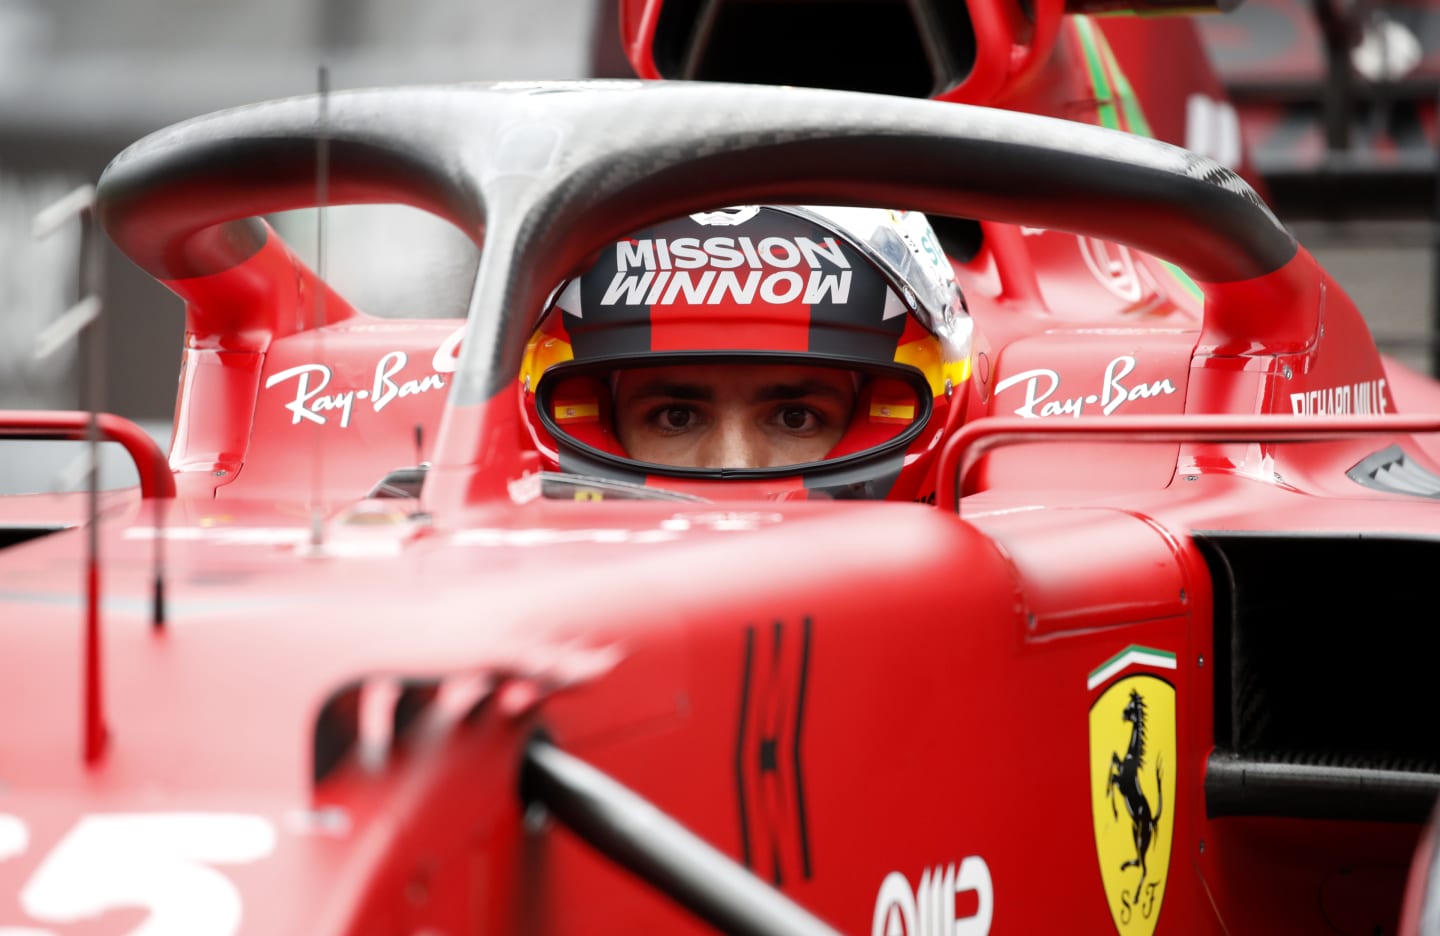 MONTE-CARLO, MONACO - MAY 22: Fourth placed qualifier Carlos Sainz of Spain and Ferrari looks on from his car as he arrives into parc ferme after qualifying prior to the F1 Grand Prix of Monaco at Circuit de Monaco on May 22, 2021 in Monte-Carlo, Monaco. (Photo by Sebastien Nogier - Pool/Getty Images)